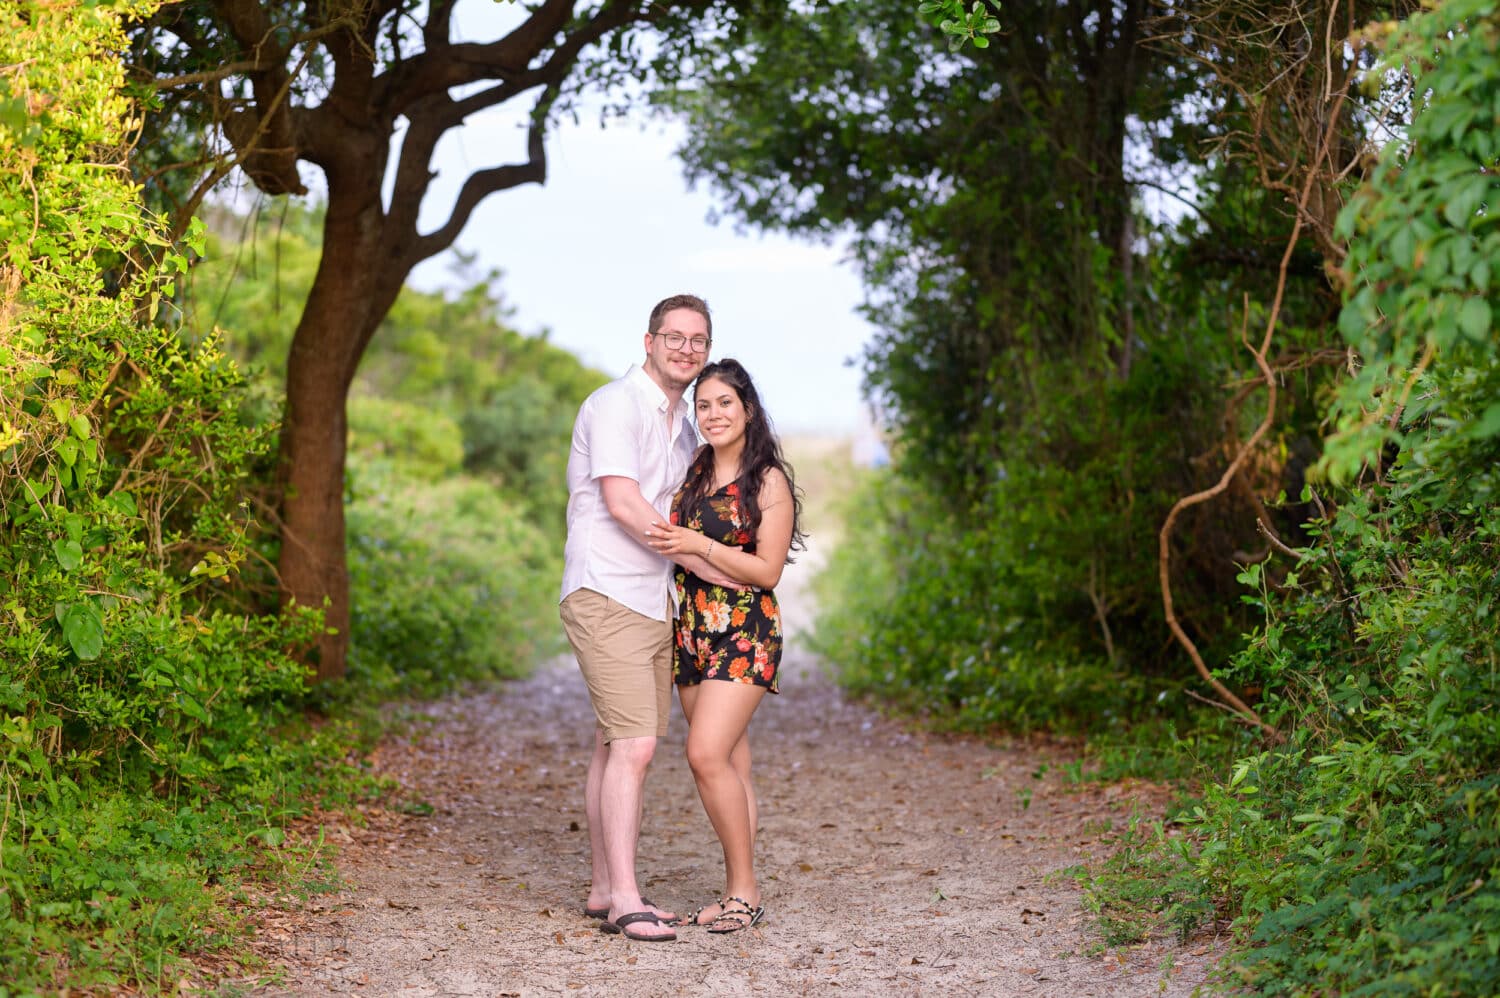 Engagement portrait surrounded by greenery on the beach pathway - Huntington Beach State Park - Myrtle Beach